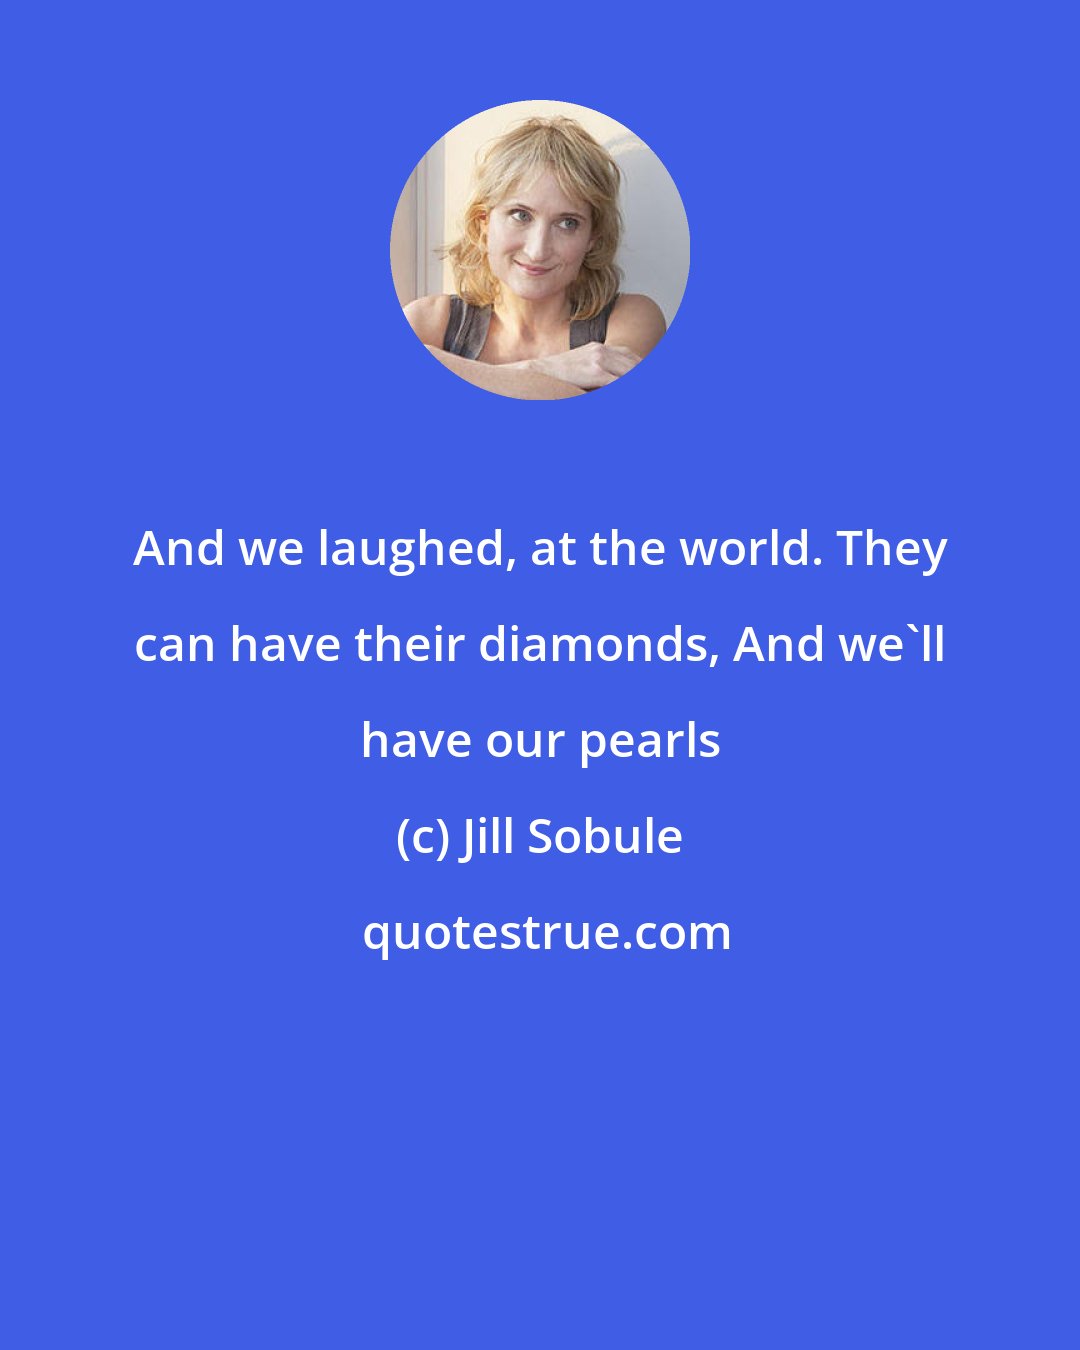 Jill Sobule: And we laughed, at the world. They can have their diamonds, And we'll have our pearls